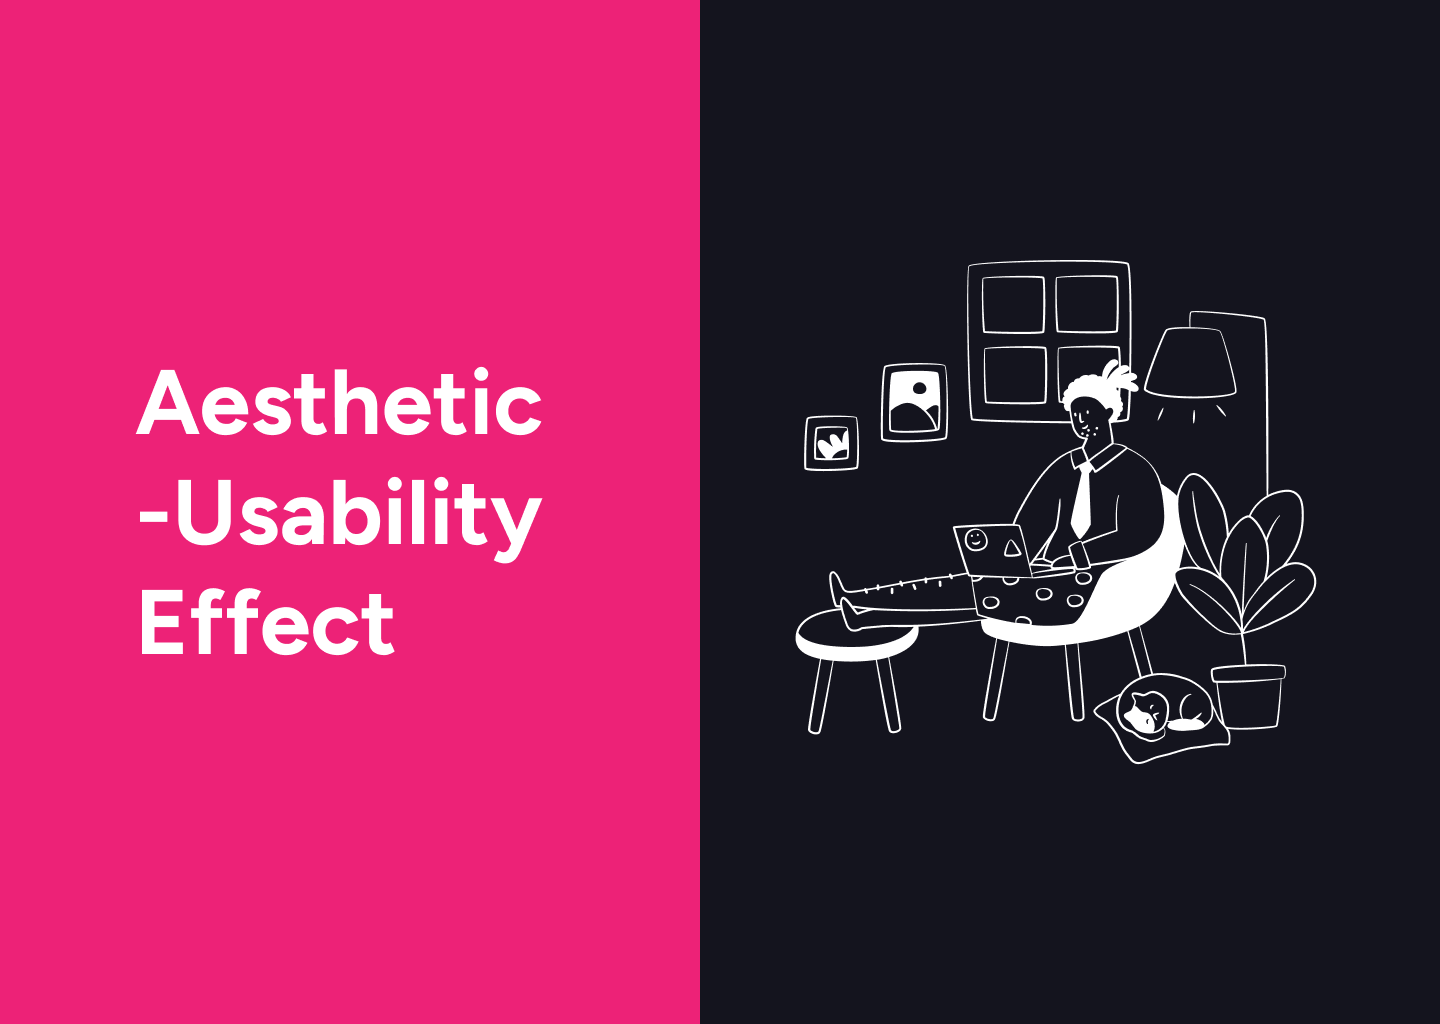 Aesthetic-Usability Effect on UX Design and 2 Best Case Study